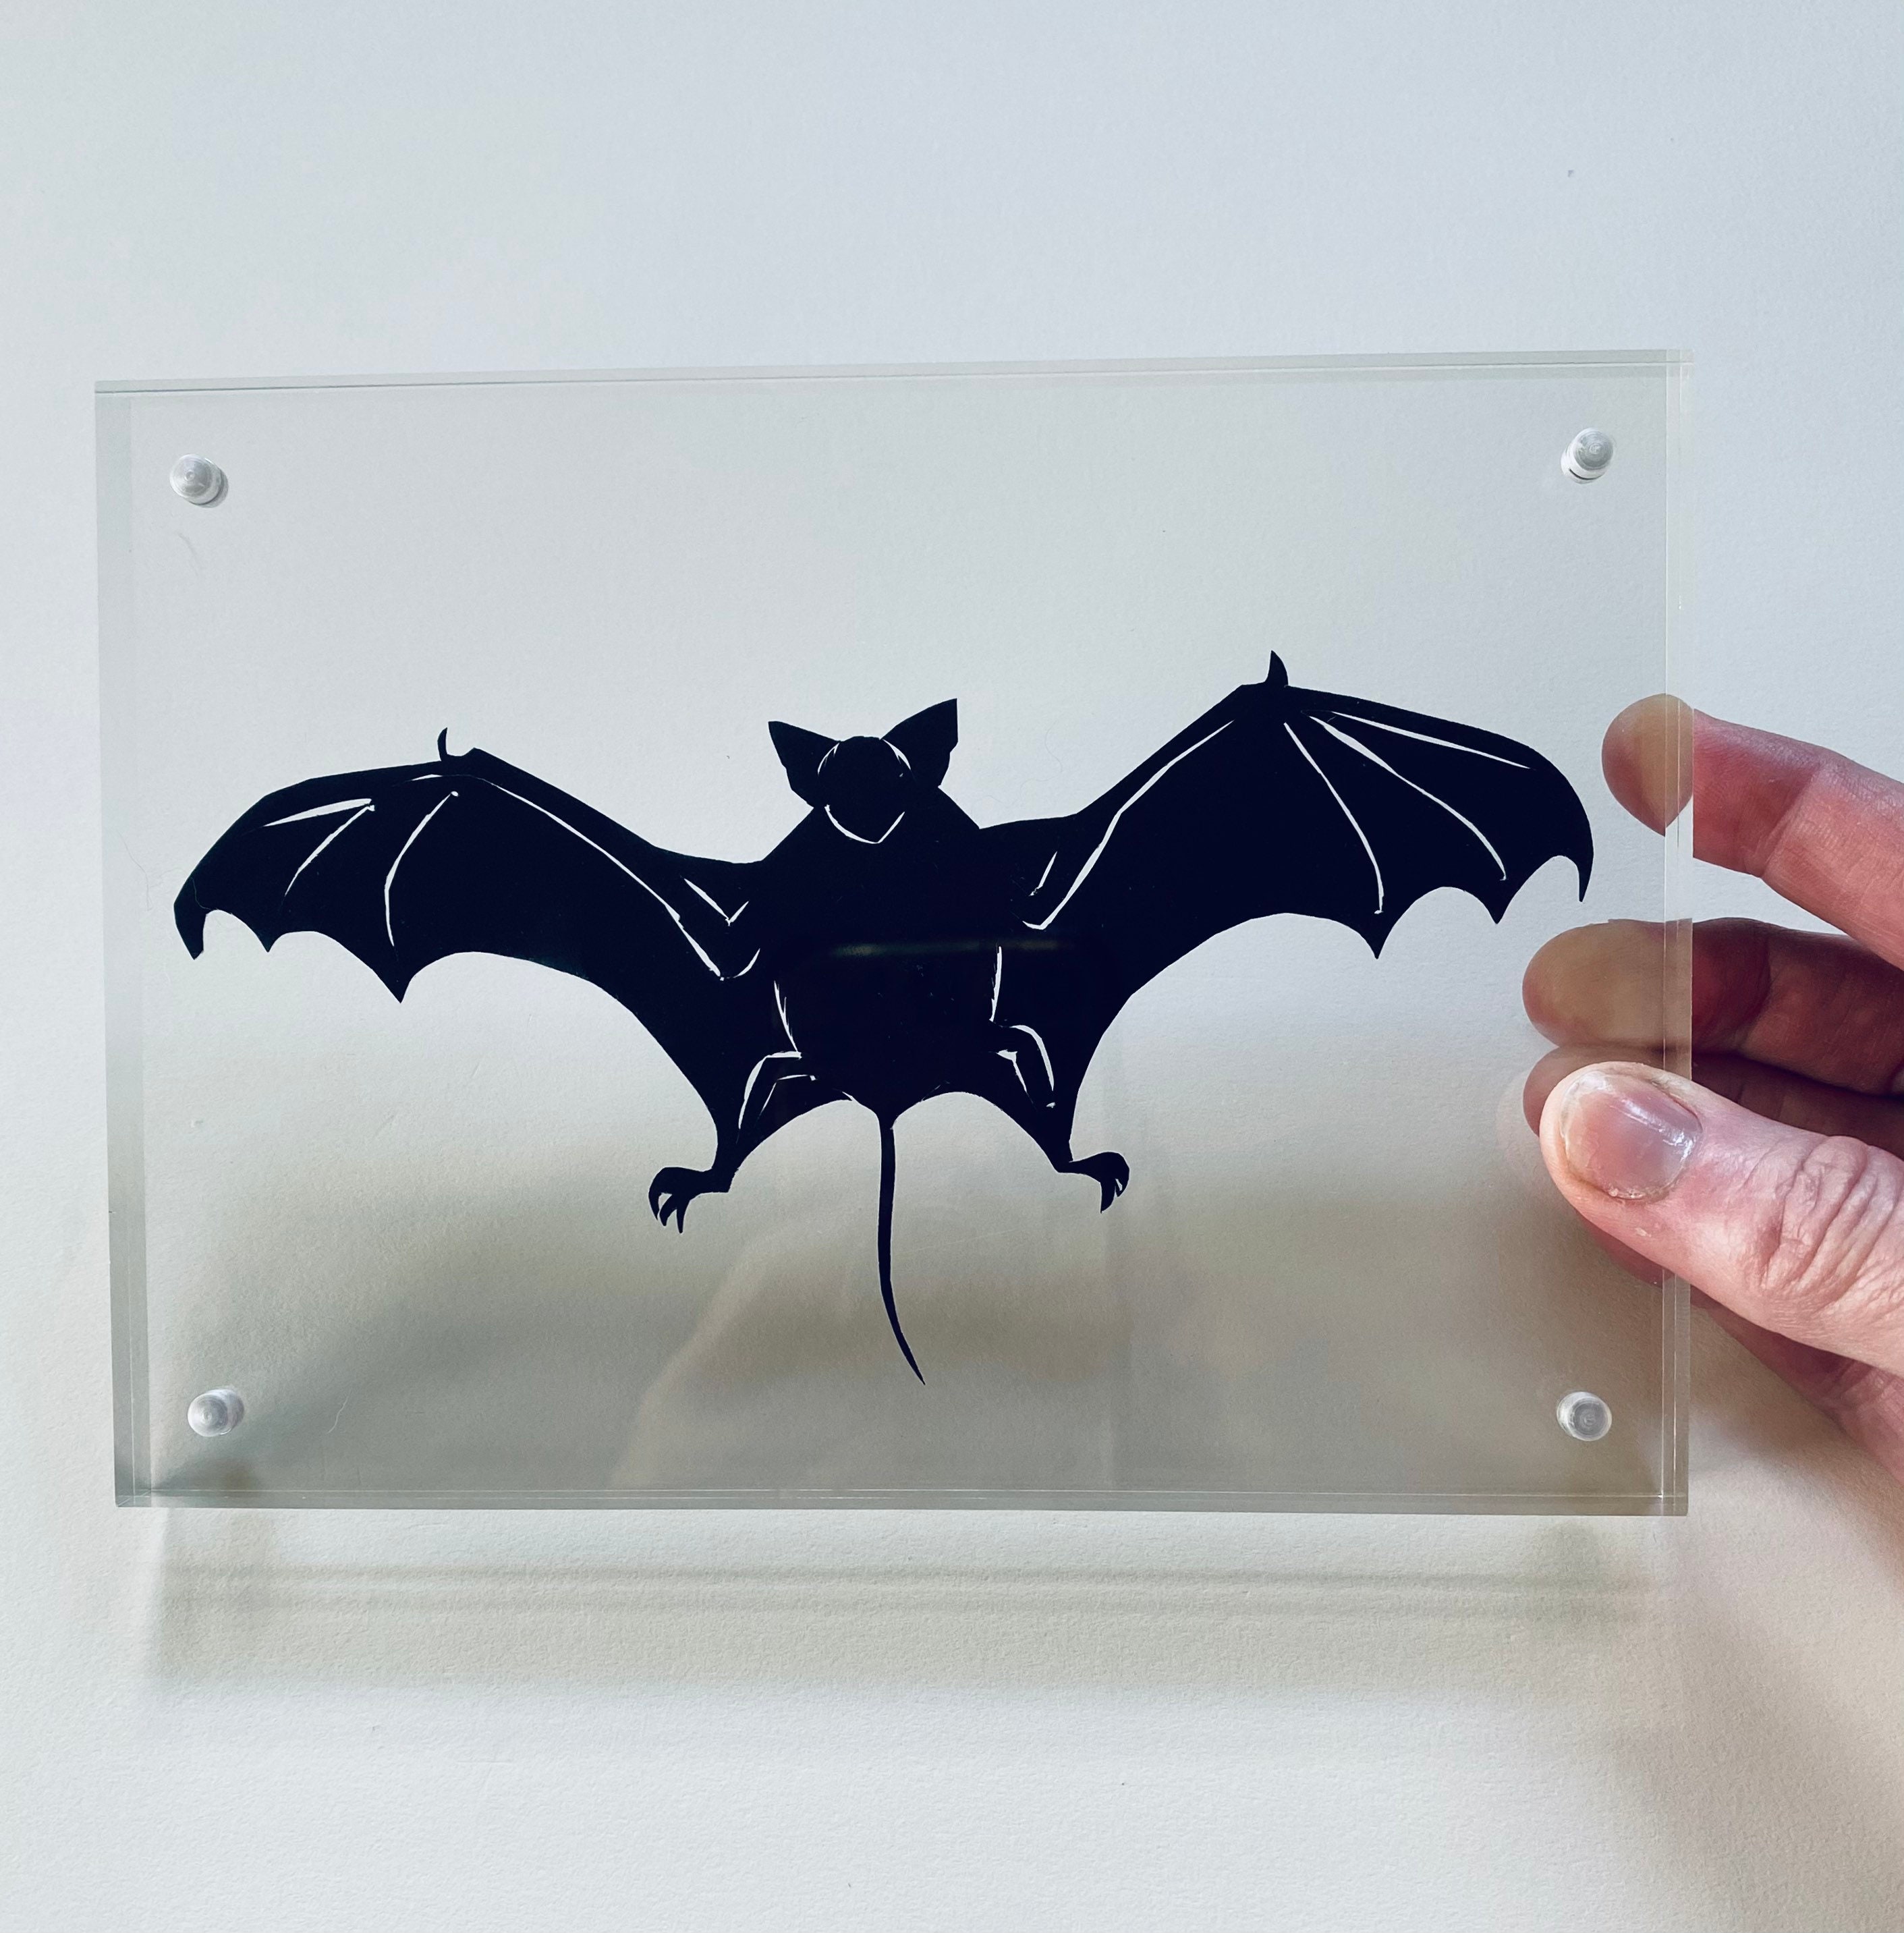 FRAMED Paper Cut Bat Silhouette, Hand Cut With Scissors, Floating